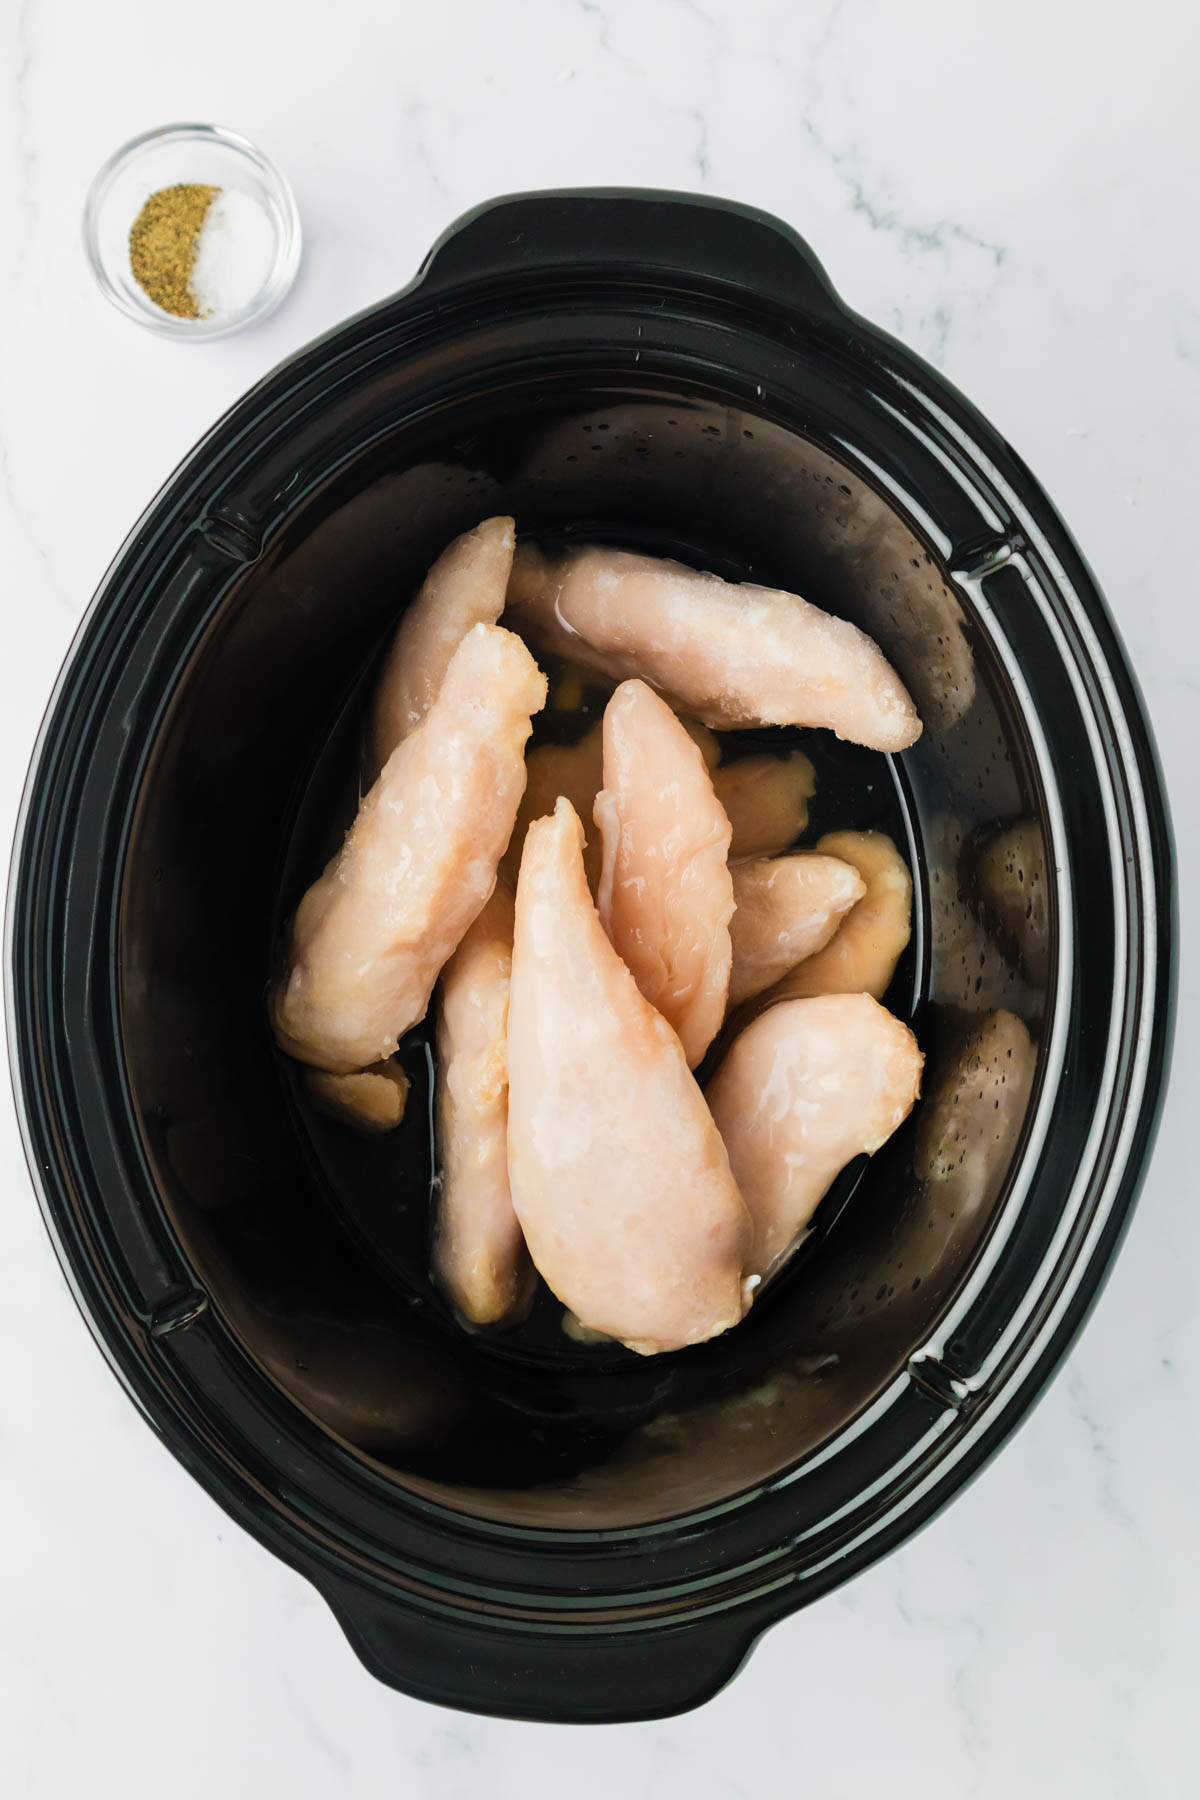 Frozen chicken breasts in a slow cooker with chicken broth and seasonings.